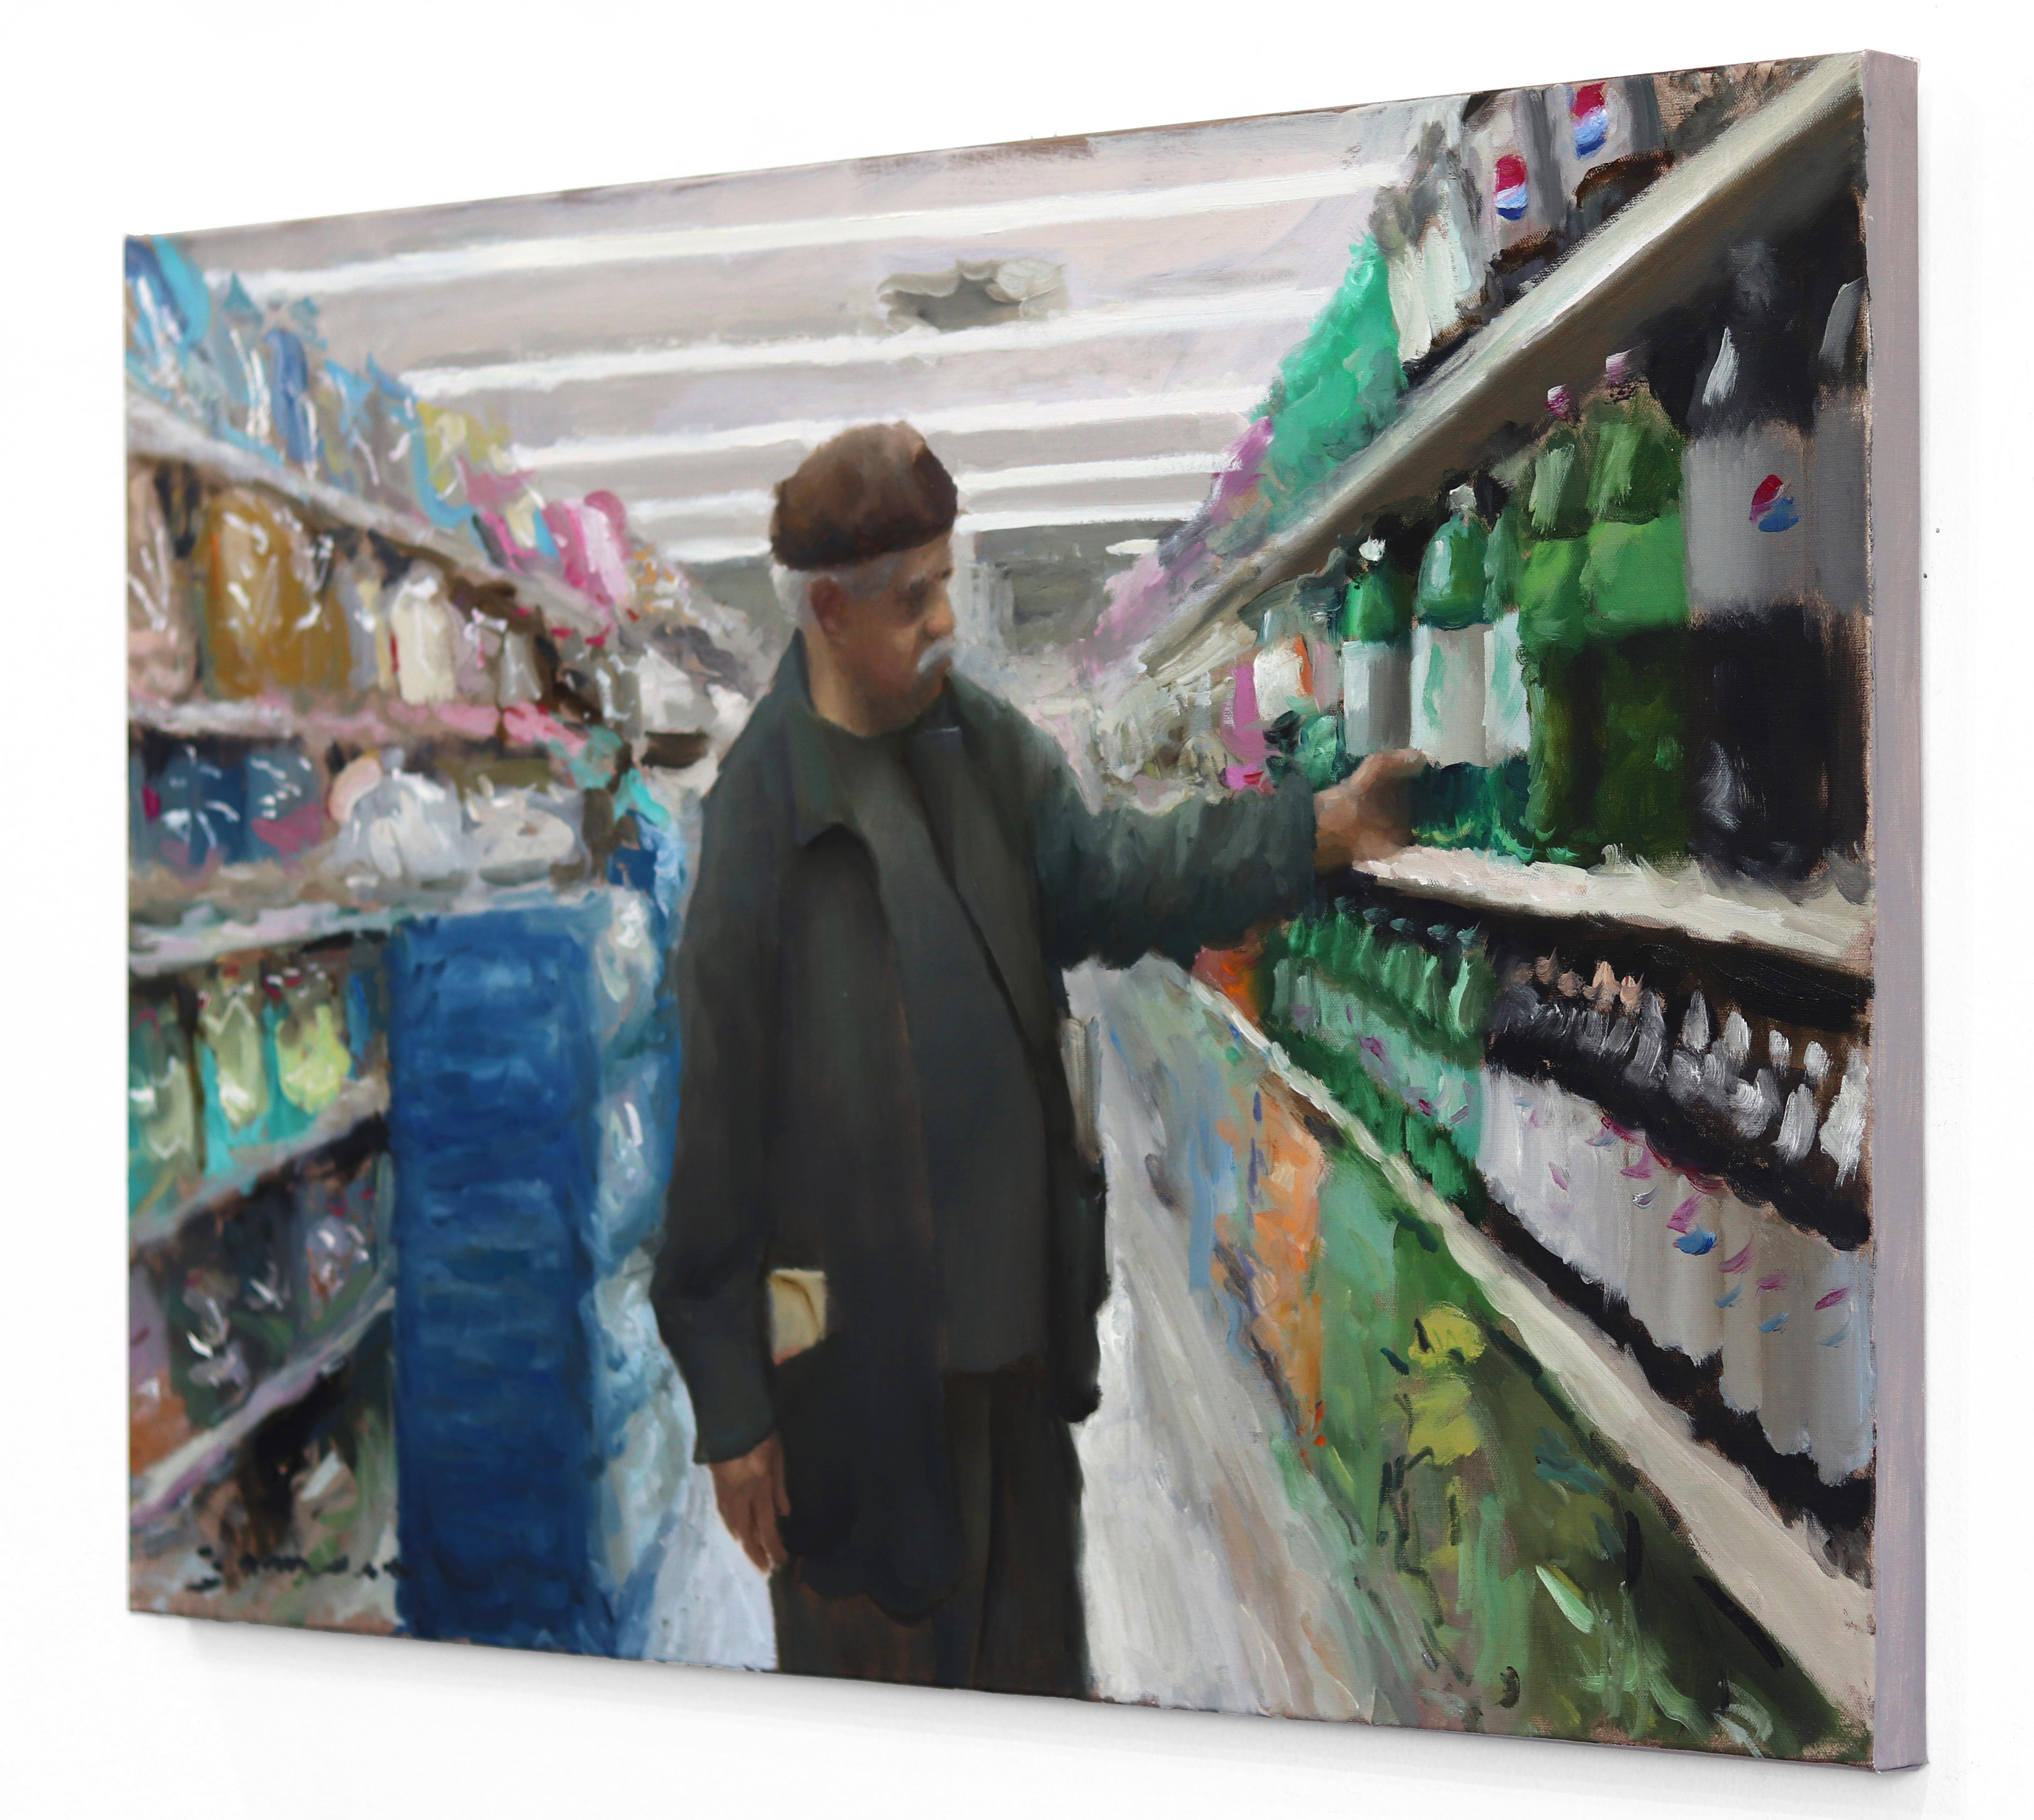 James Zamora's realistic “aisle paintings” are well-known throughout the US. Using different spatial compositions the artist translates common marketplace food imagery into a stylized, elevated environment. Working in oil on canvas, he explores the